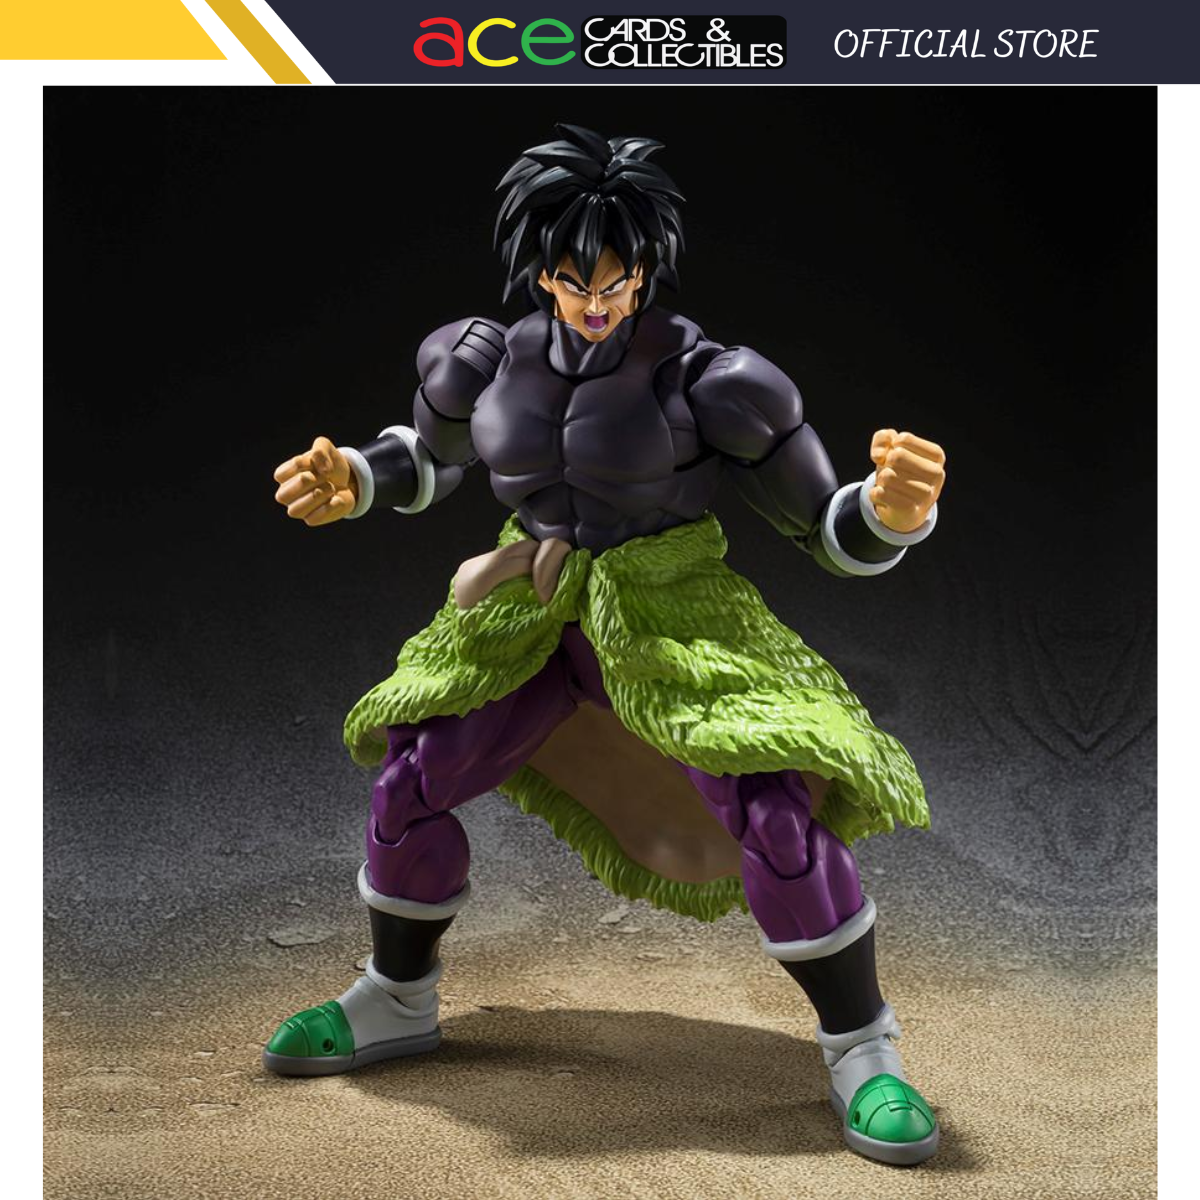 Dragon Ball S.H Figuarts Action Figure "Broly Super Hero"-Tamashii-Ace Cards & Collectibles